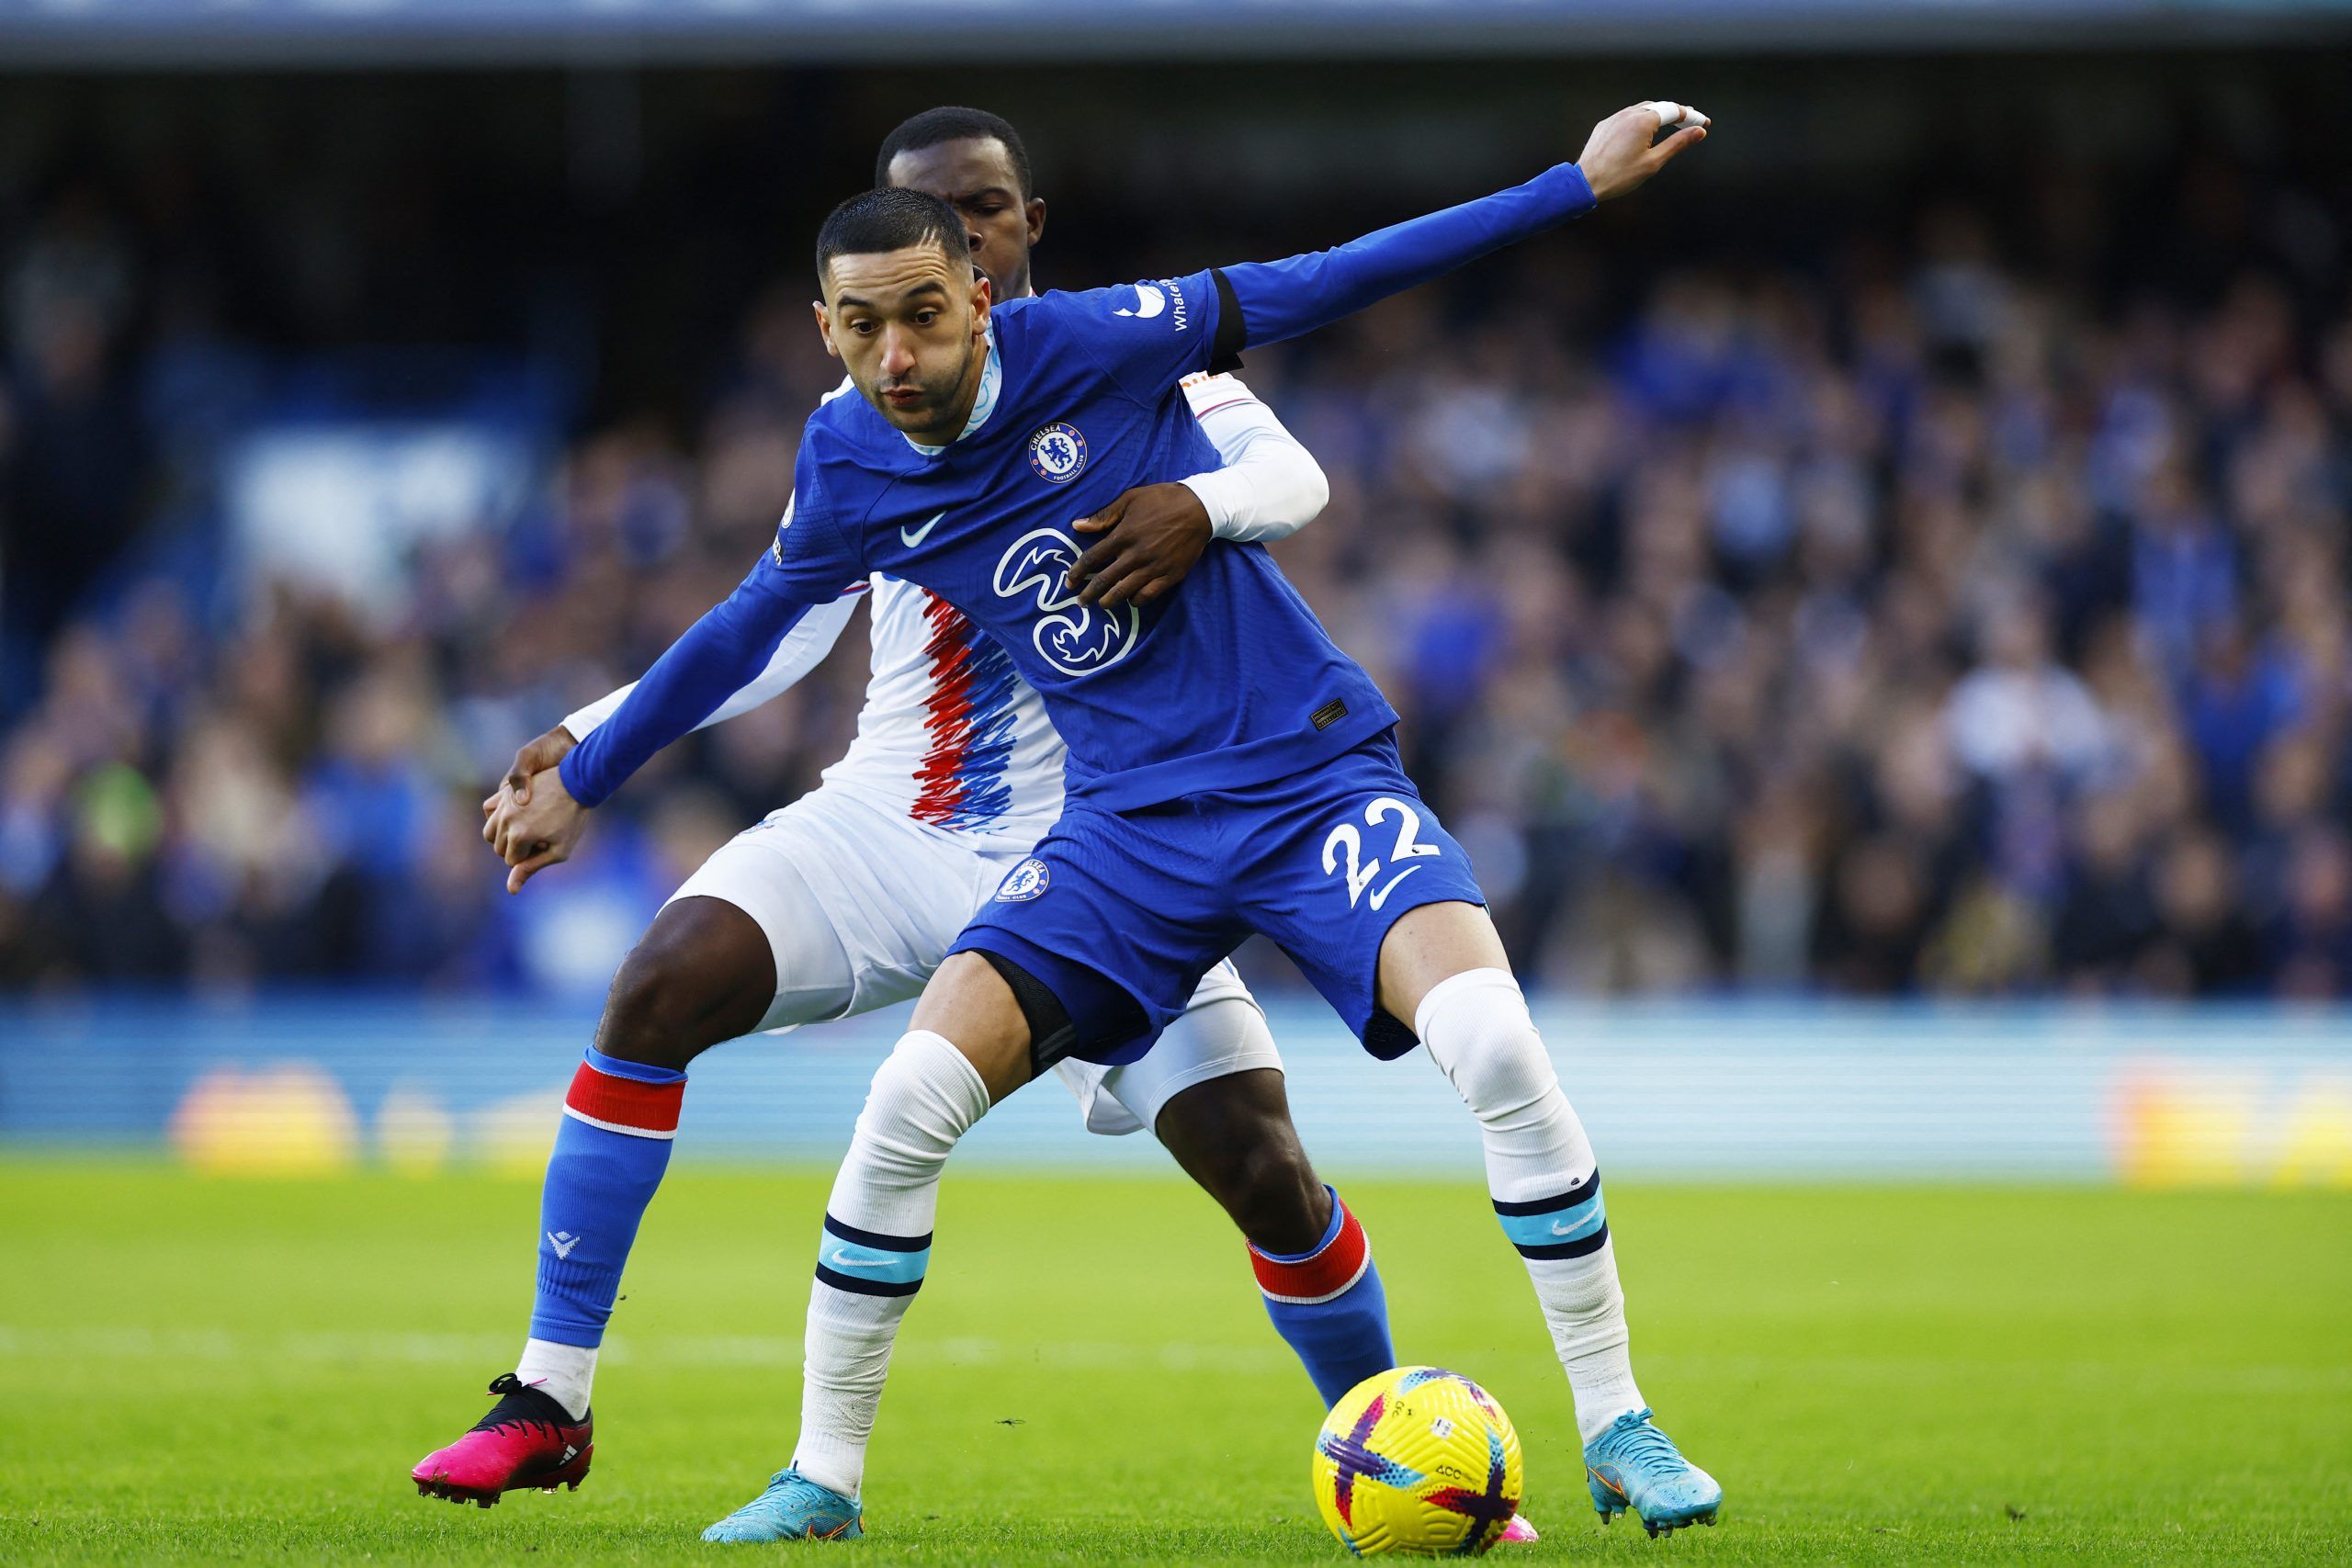 Soccer Football - Premier League - Chelsea v Crystal Palace - Stamford Bridge, London, Britain - January 15, 2023 Chelsea's Hakim Ziyech in action with Crystal Palace's Tyrick Mitchell Action Images via REUTERS/Peter Cziborra EDITORIAL USE ONLY. No use with unauthorized audio, video, data, fixture lists, club/league logos or 'live' services. Online in-match use limited to 75 images, no video emulation. No use in betting, games or single club /league/player publications.  Please contact your acco